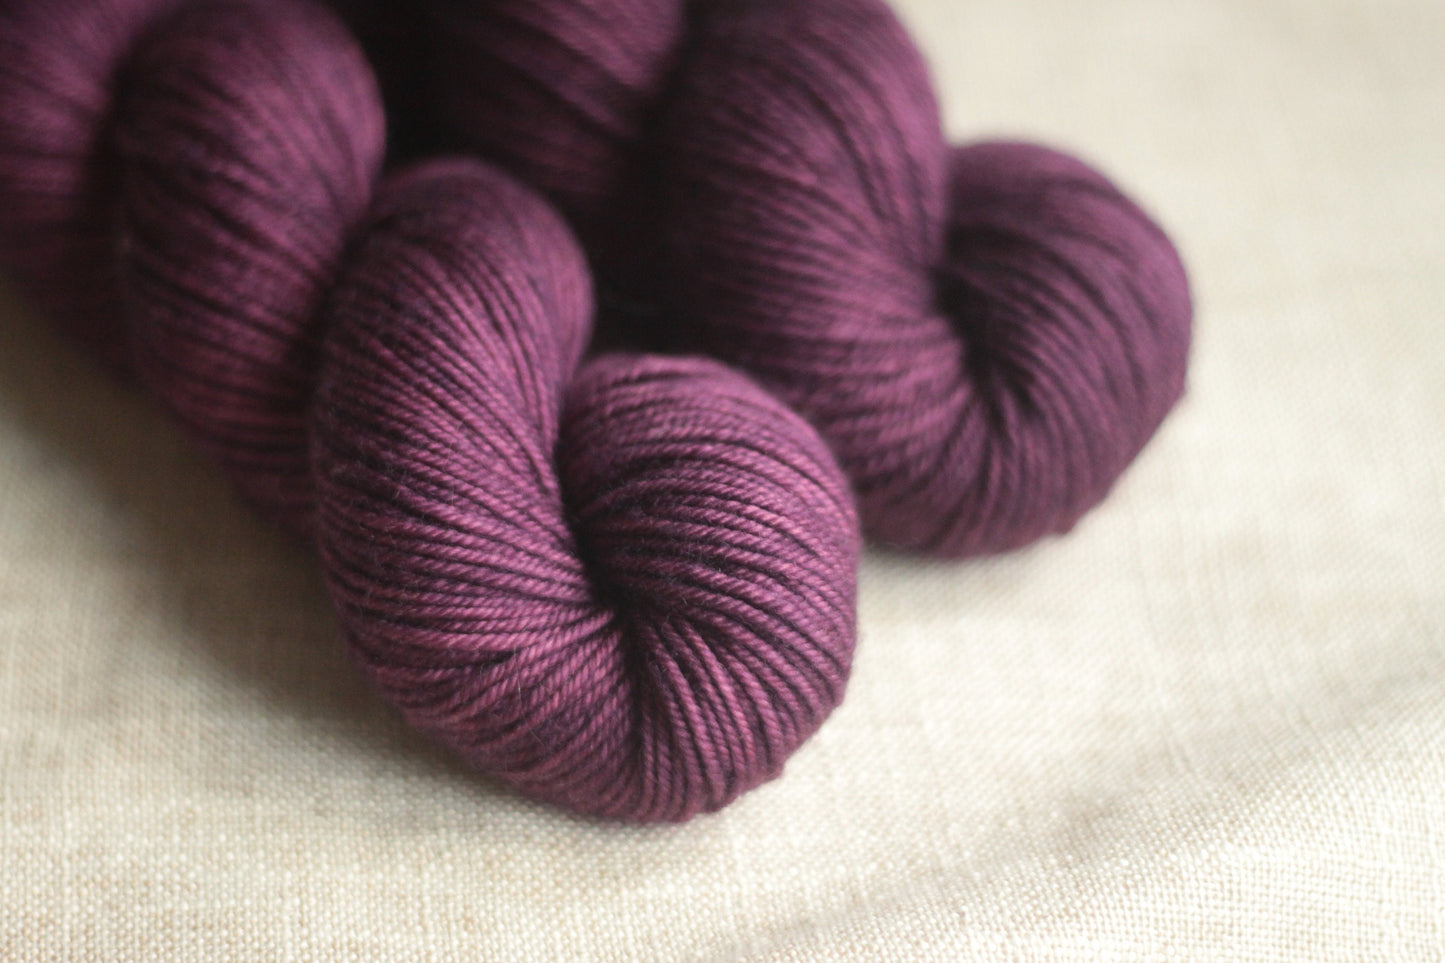 Compote - Merino Worsted